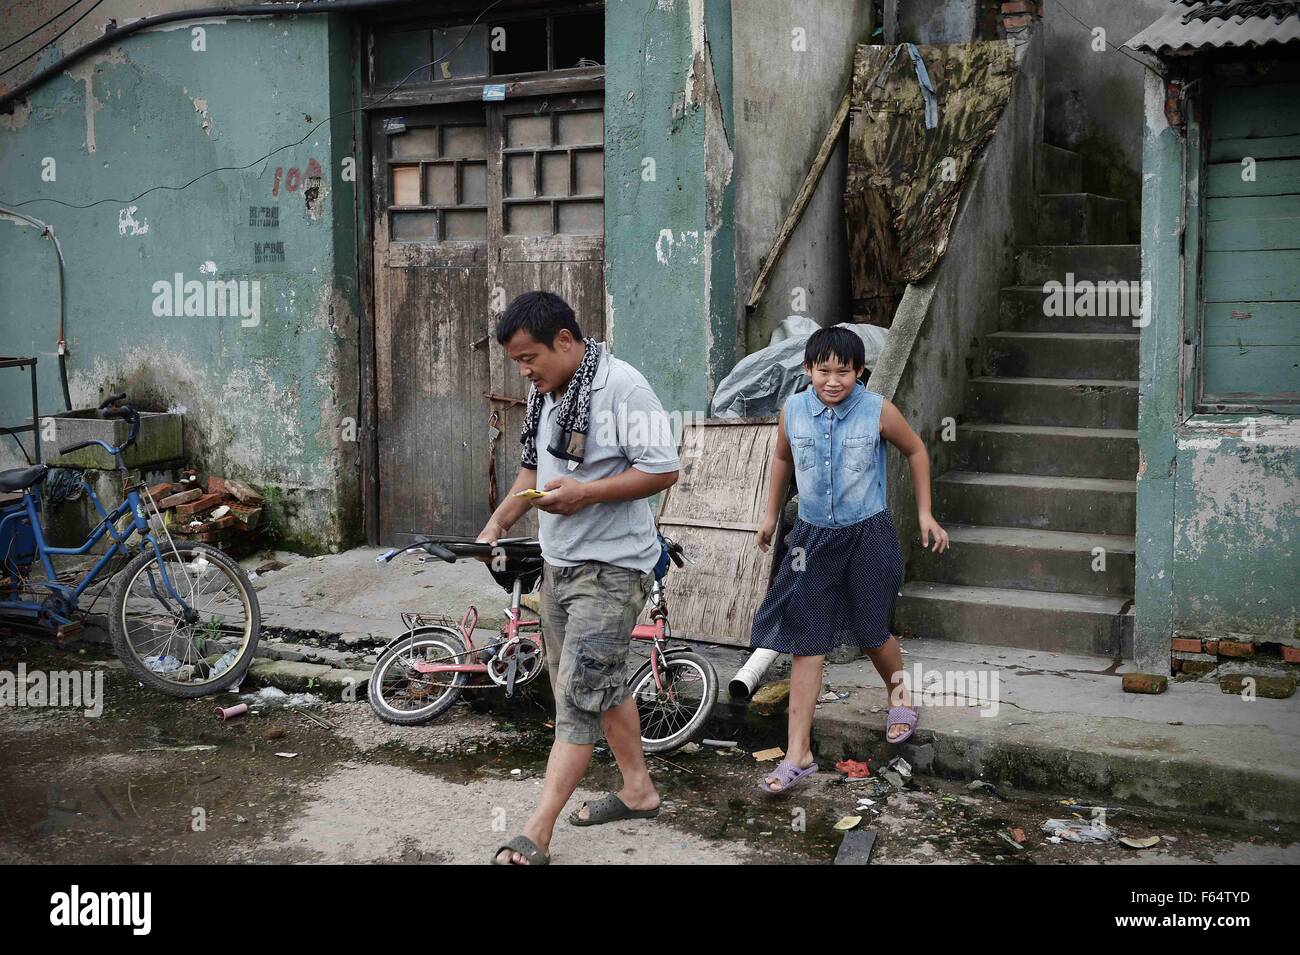 Shanghai, Shanghai, CHN. 25th Aug, 2014. Shanghai, CHINA - August 25 2014: (EDITORIAL USE ONLY. CHINA OUT) Liu Jing's parents live on collecting garbage in Shanghai. And every summer she goes to Shanghai from Yancheng Jiangsu to reunion with them as a migrant bird. © SIPA Asia/ZUMA Wire/Alamy Live News Stock Photo